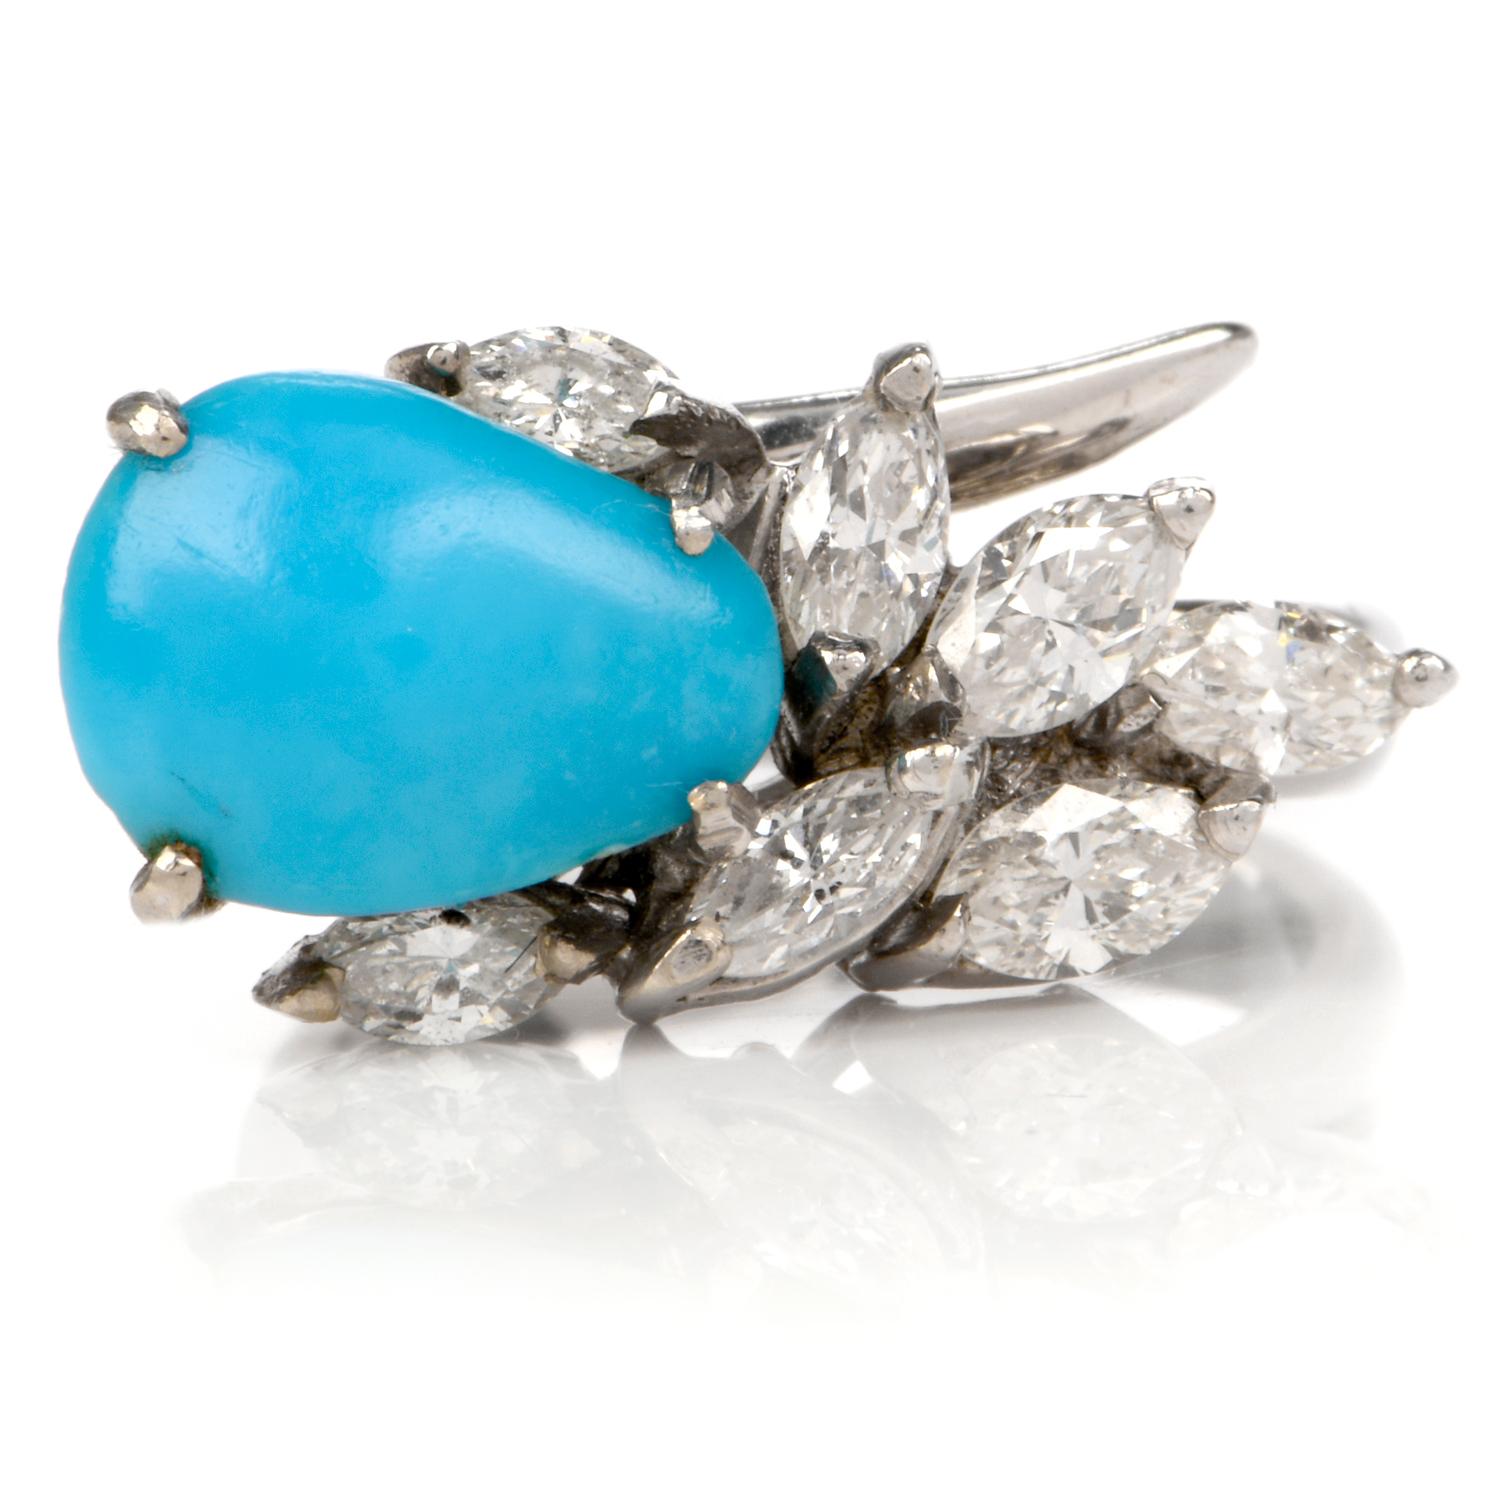 This chic circa 1960s botanically inspired Persian turquoise and diamond cocktail ring is crafted in solid 18 karat white gold, weighing 6.1 grams. Centered with one prong-set pear shaped cabochon finest quality Persian turquoise. Alongside seven